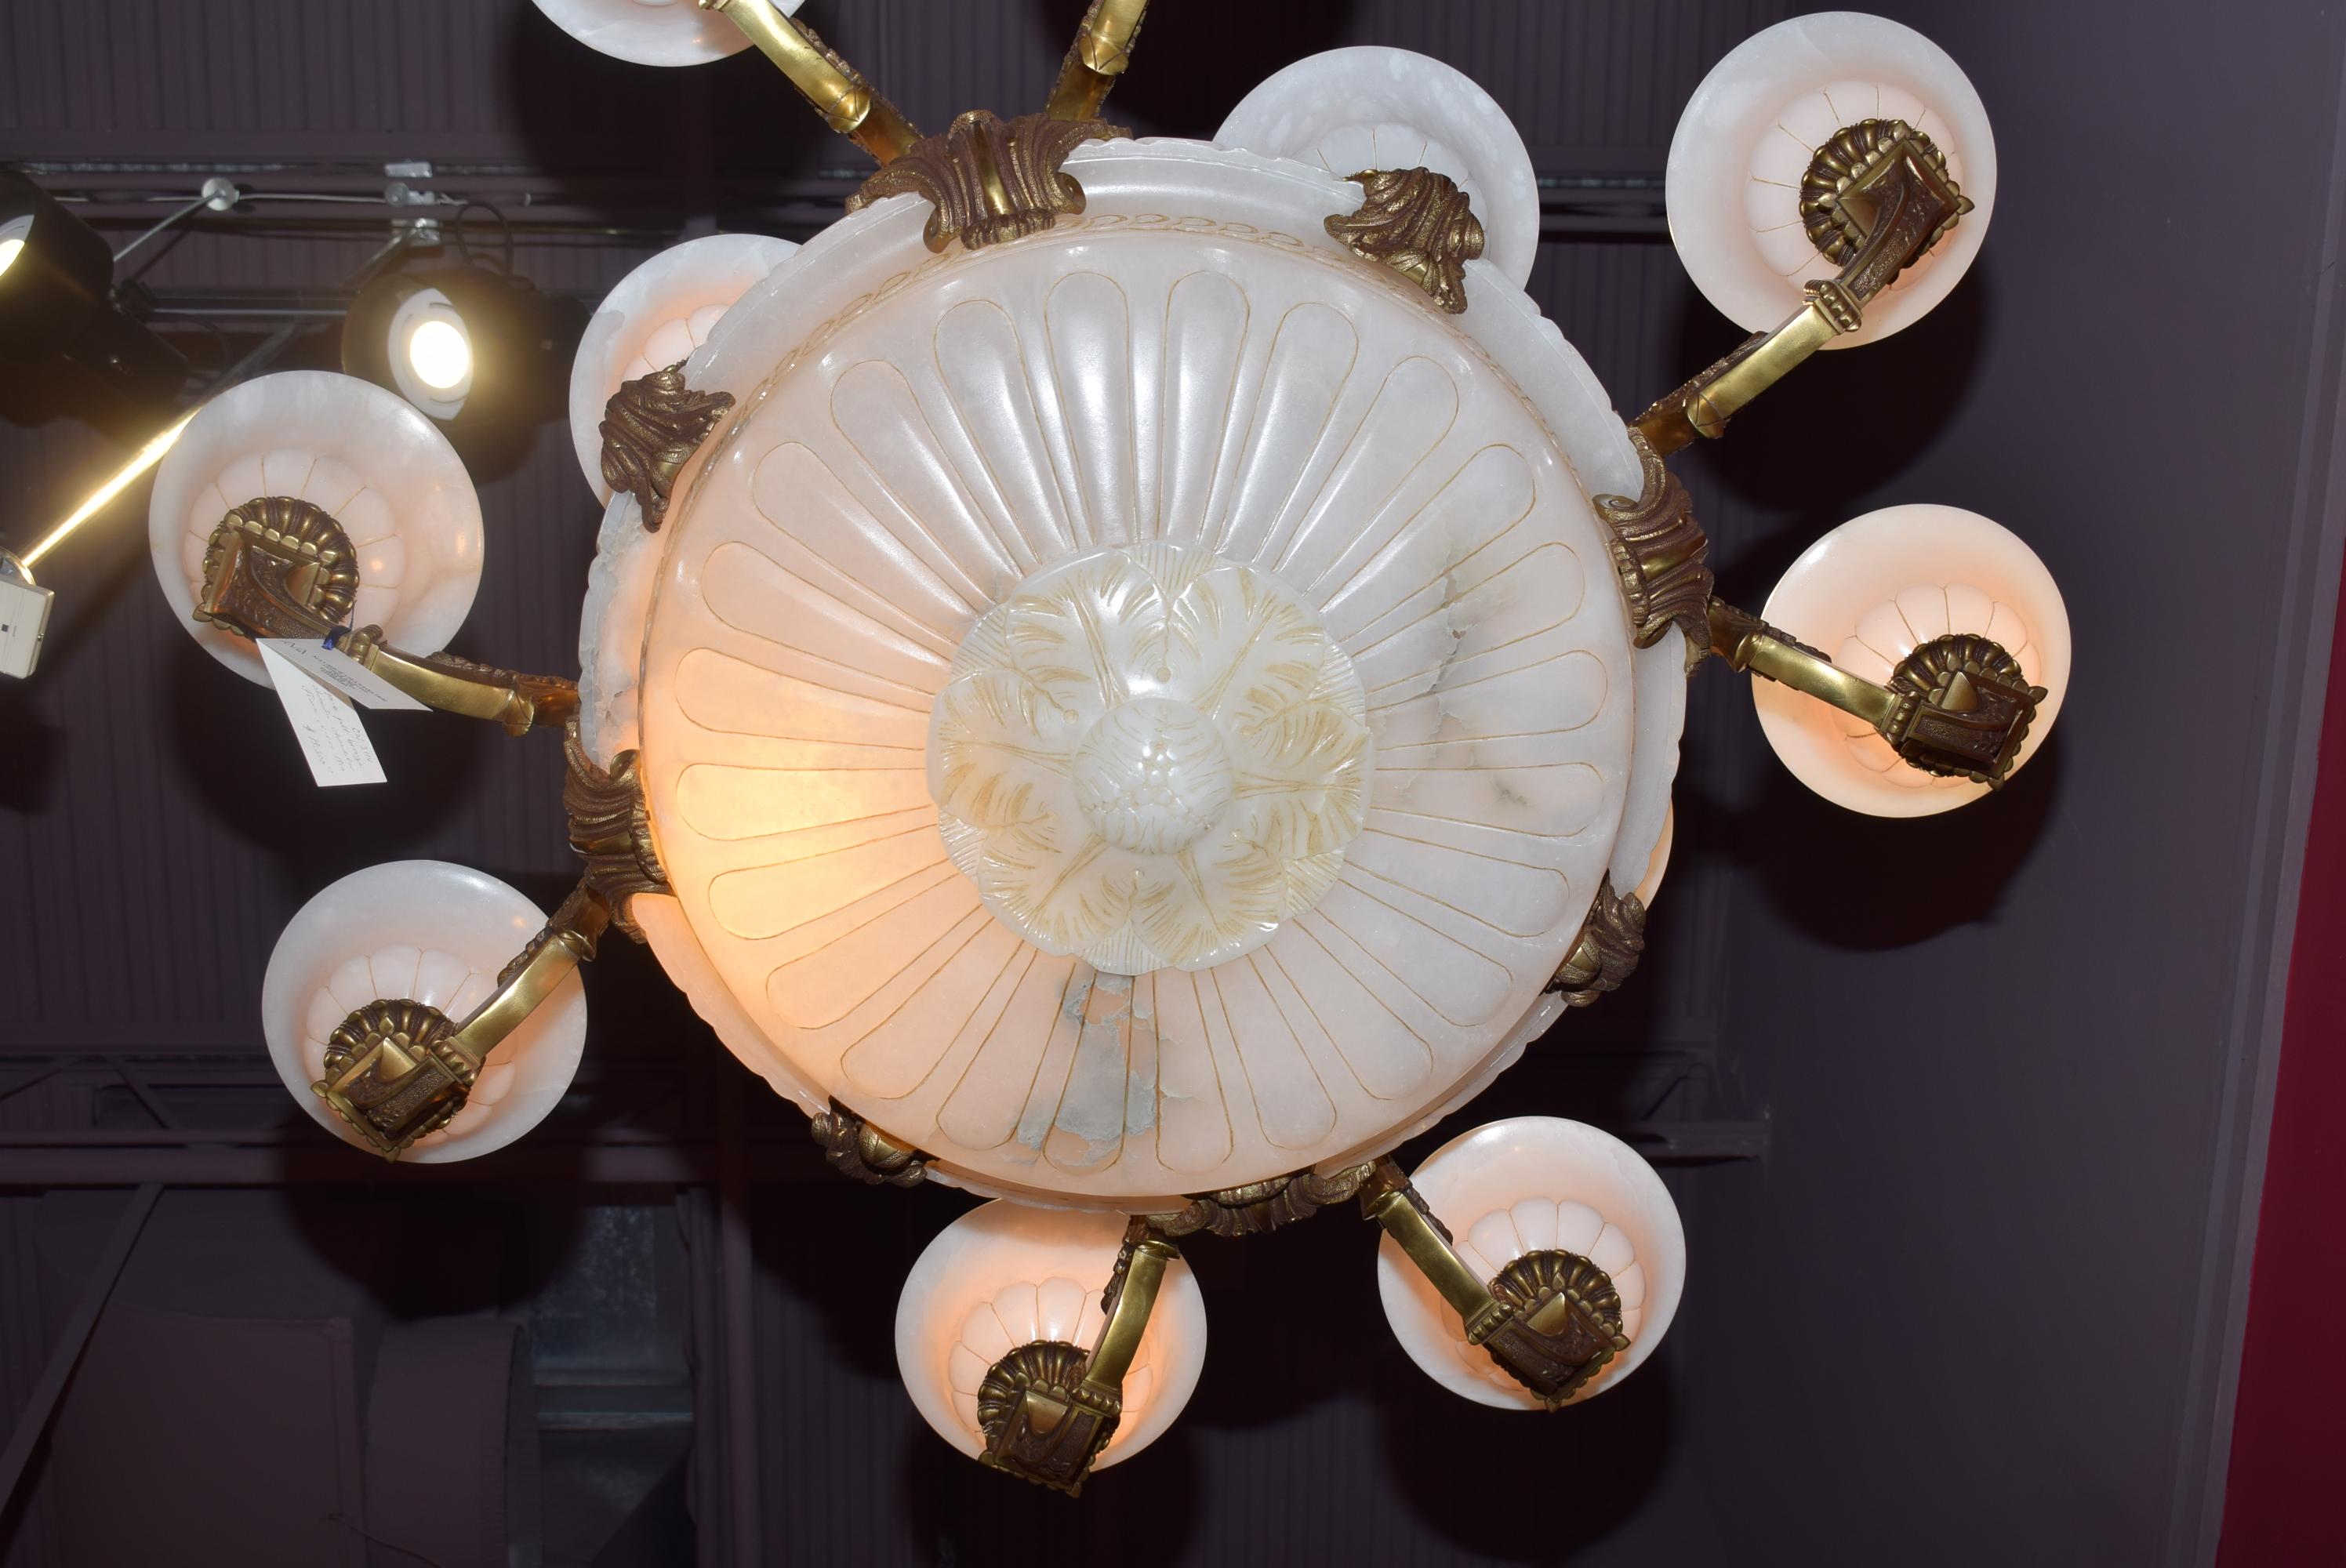 A magnificent gilt bronze and alabaster chandelier with hand carved alabaster dome and shades. Please notice the intricate carving of the dome.
France, circa 1910. 20-light (16 inside shades; 4 inside dome)
Dimensions: Height 45